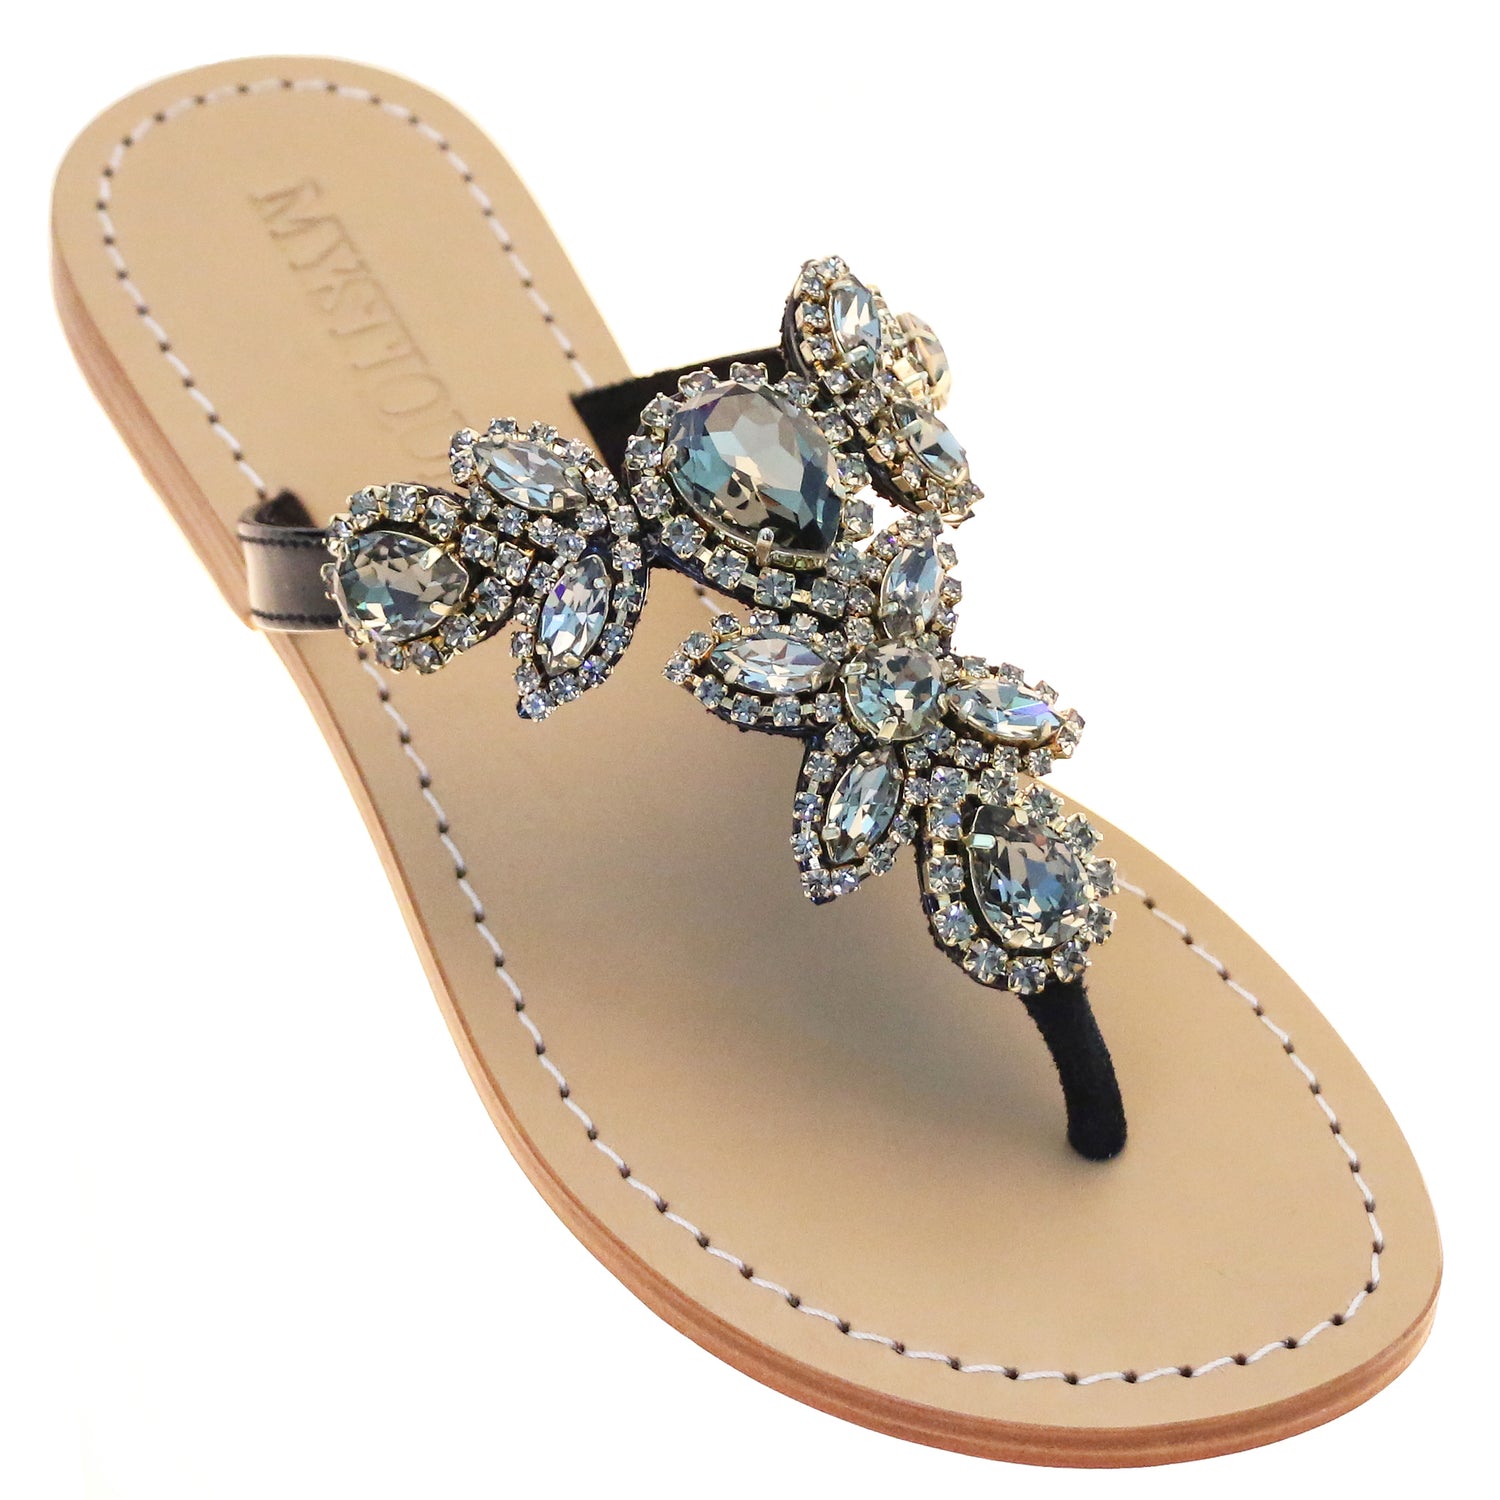 sandals with diamonds on them